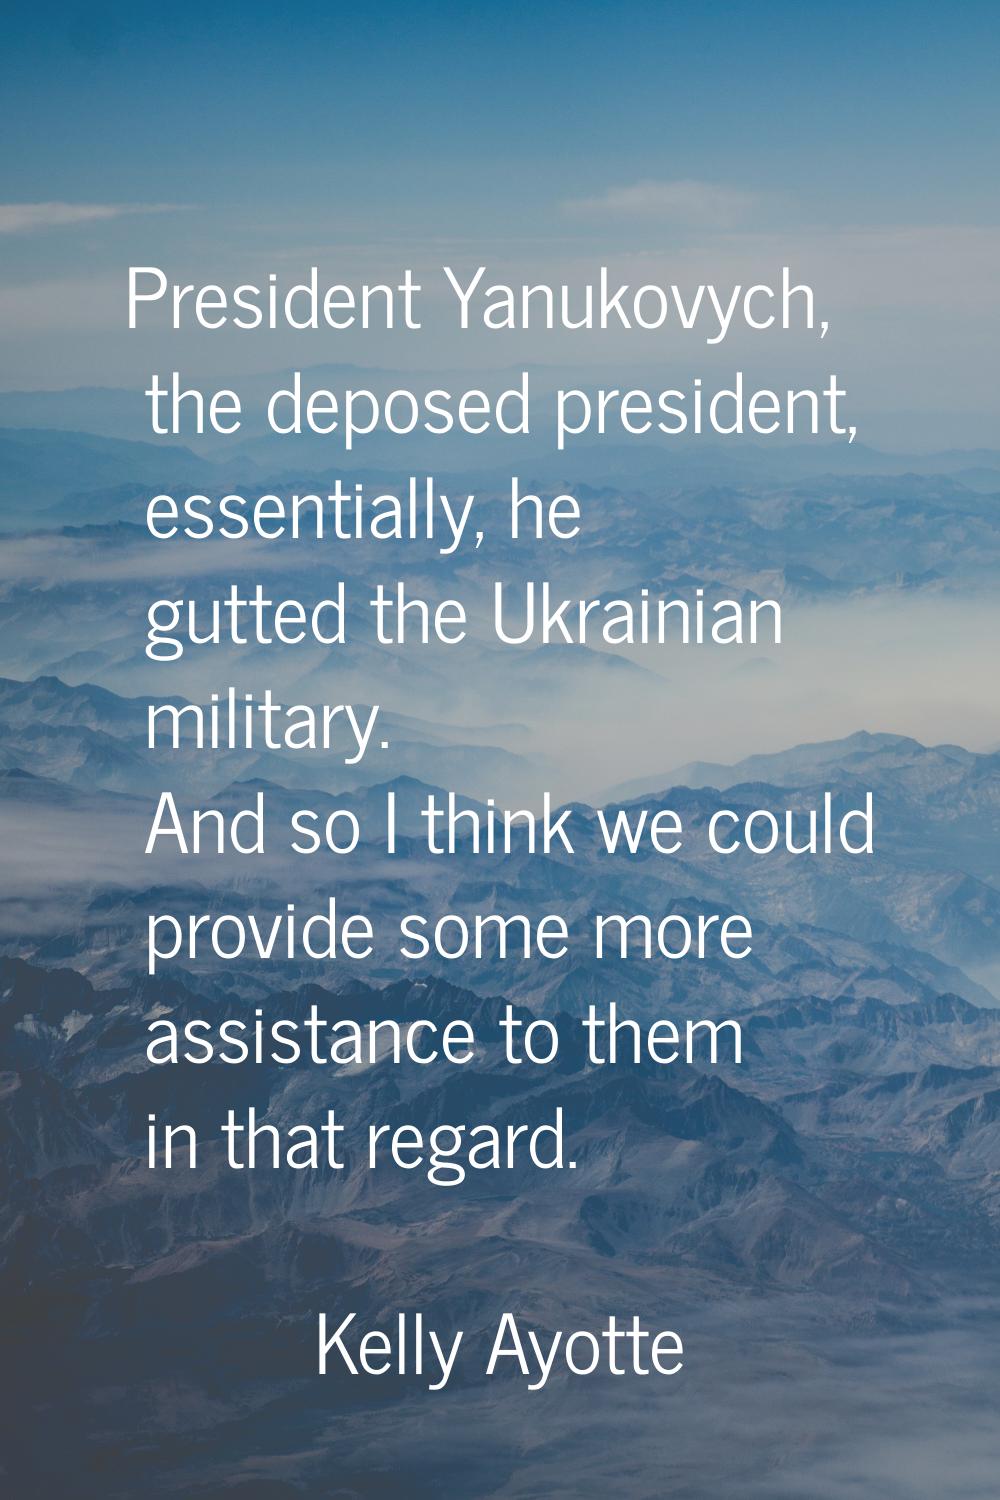 President Yanukovych, the deposed president, essentially, he gutted the Ukrainian military. And so 